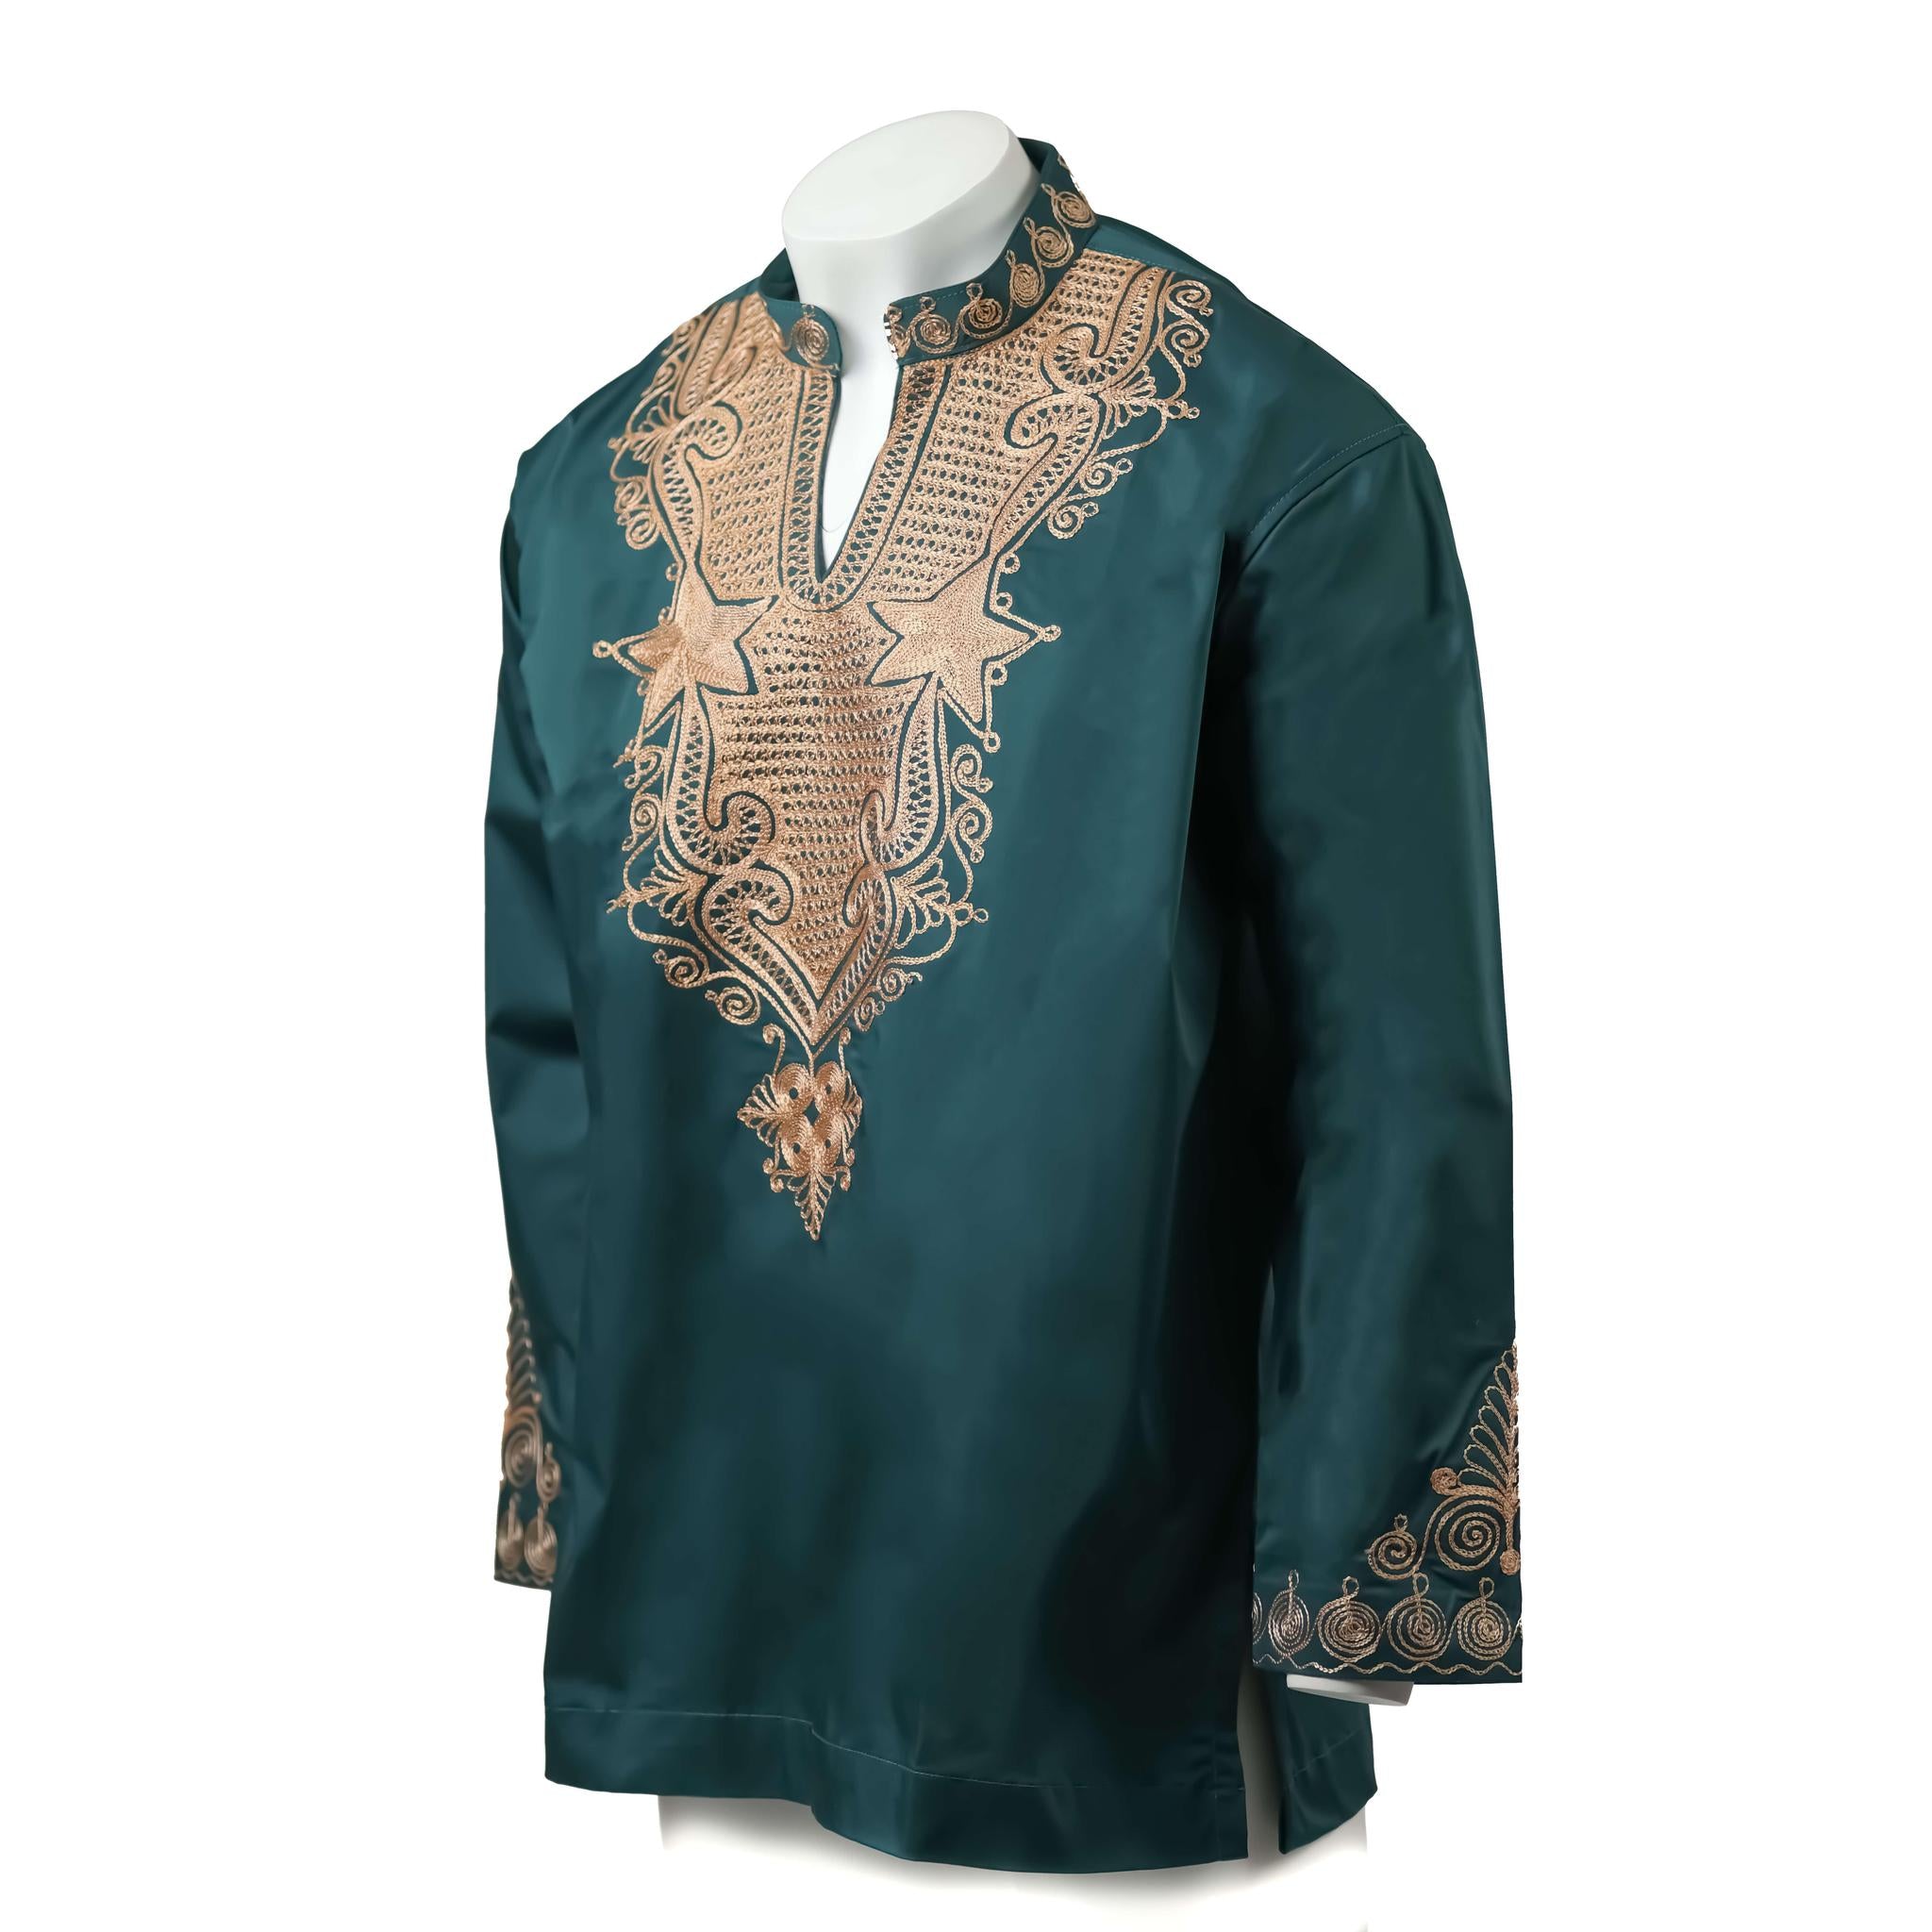 Green & Gold Embroidered Long Sleeve Top